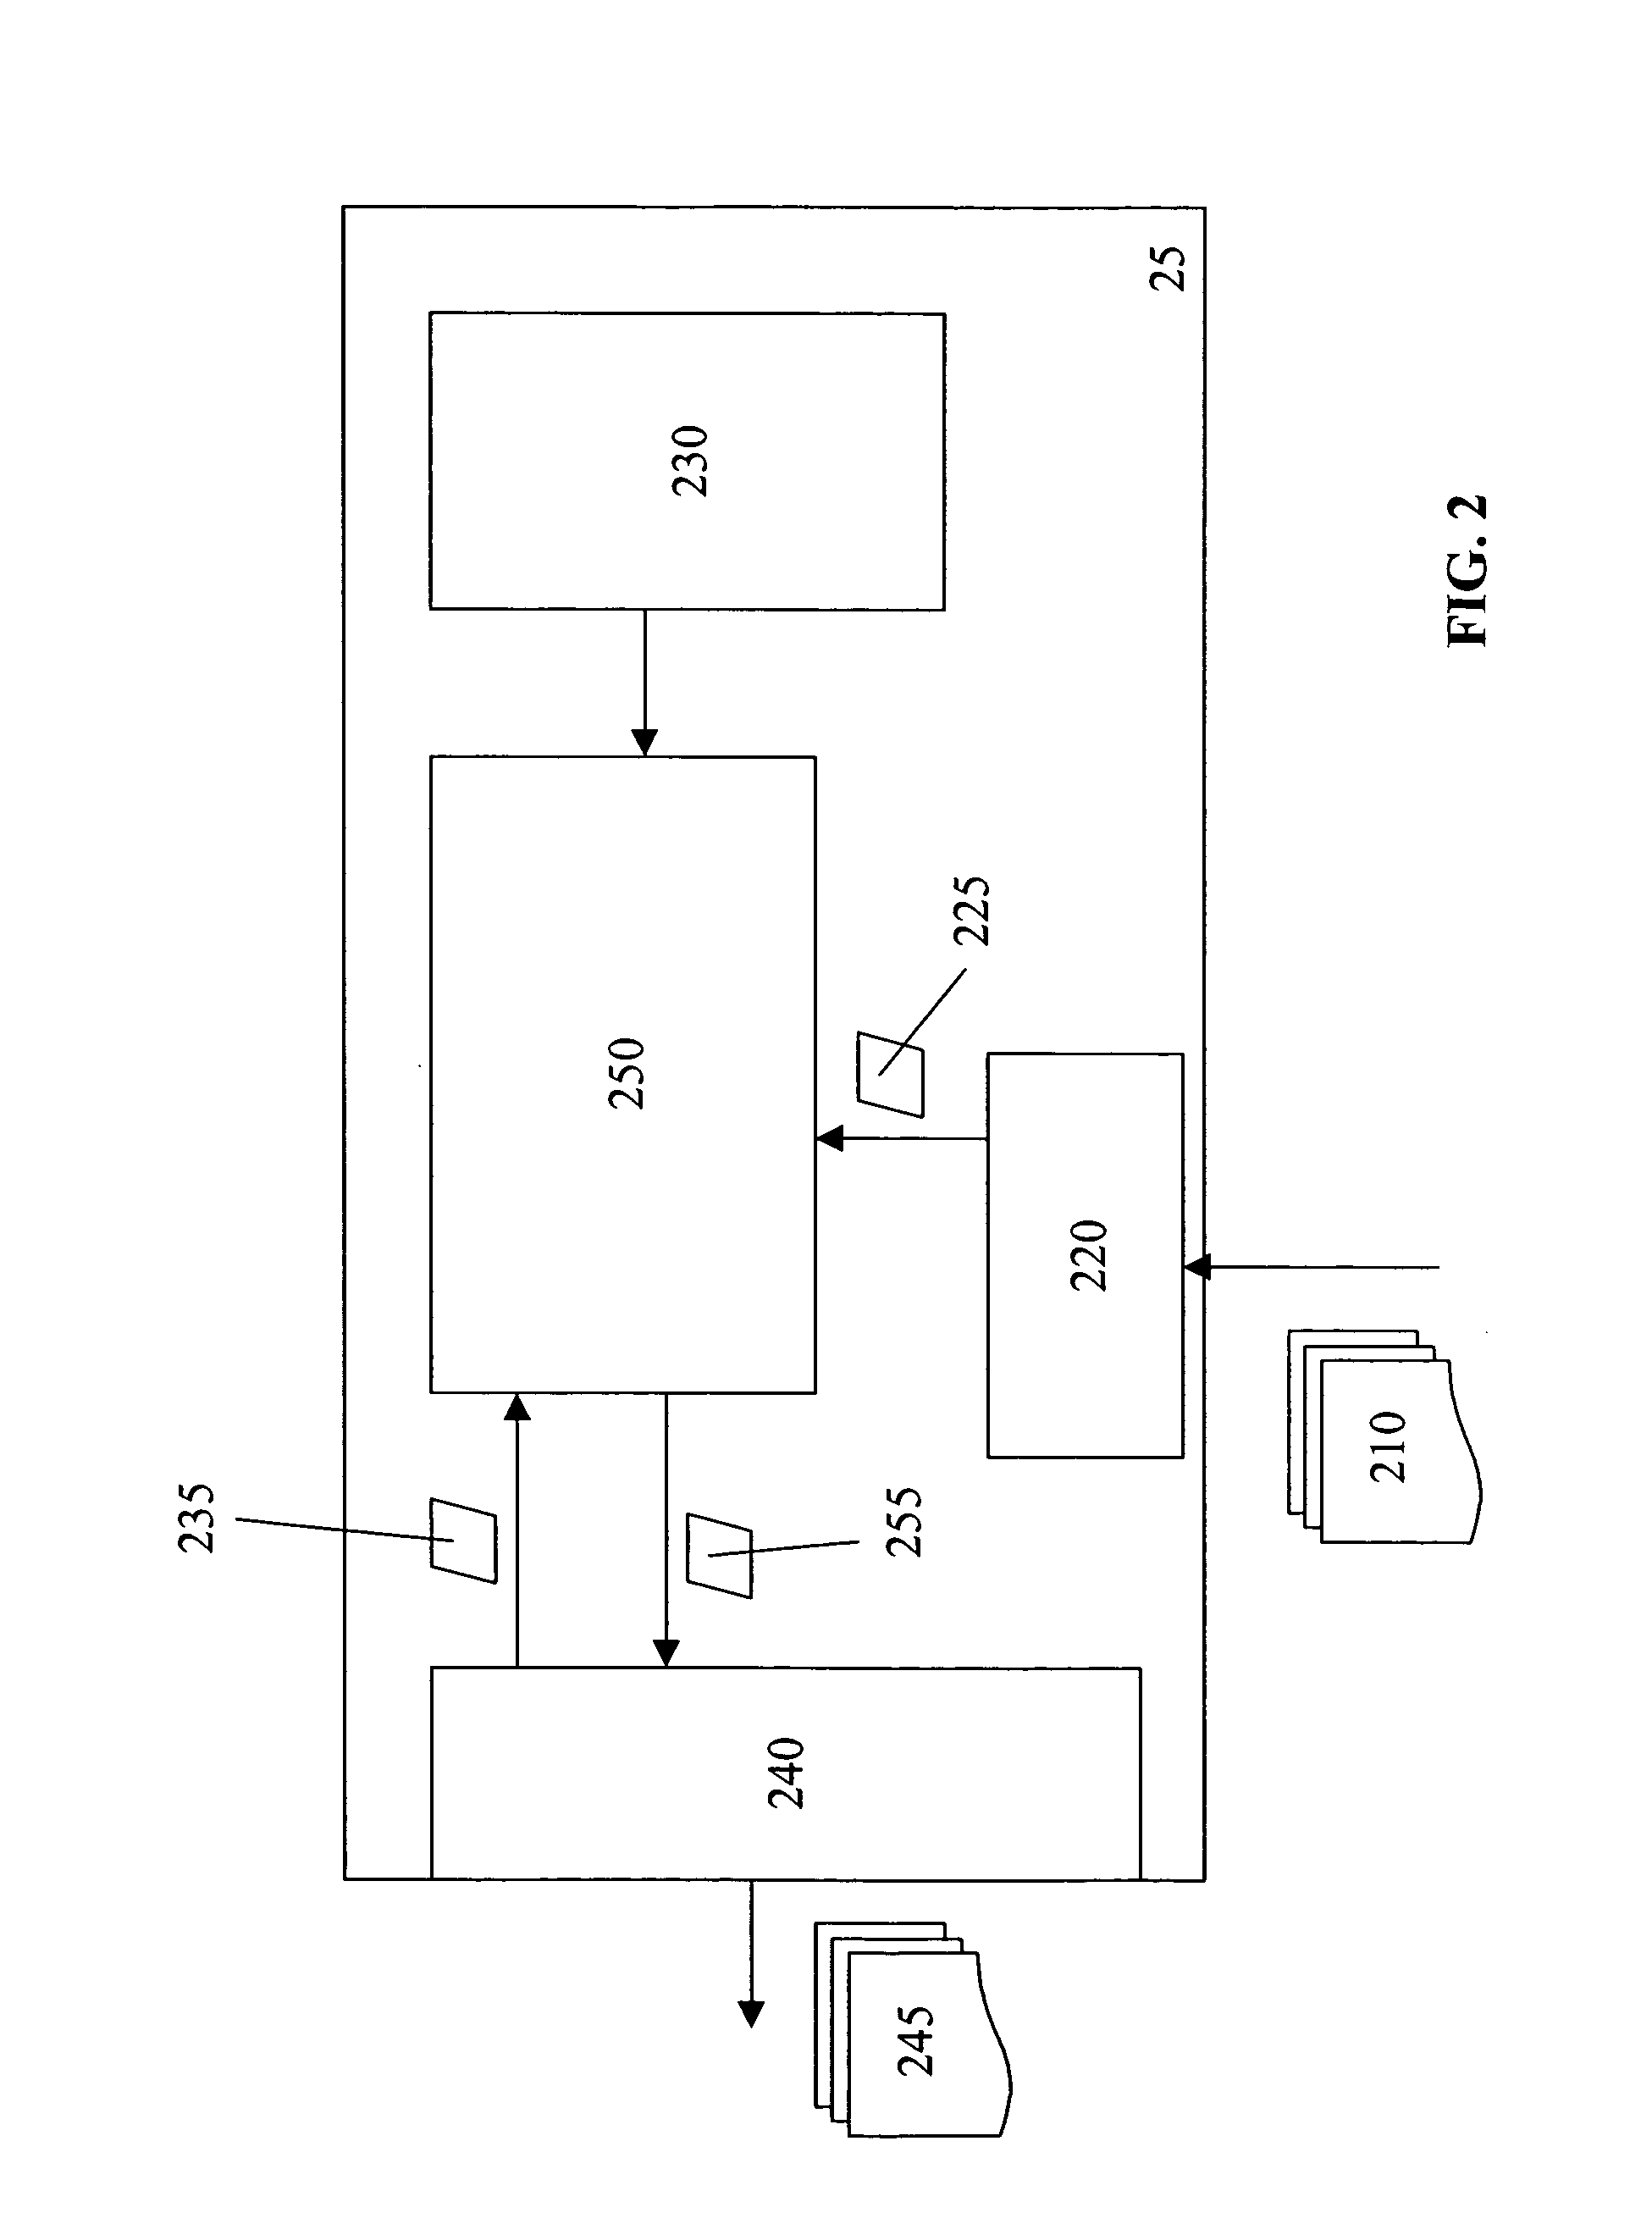 System and method for managing energy generation equipment